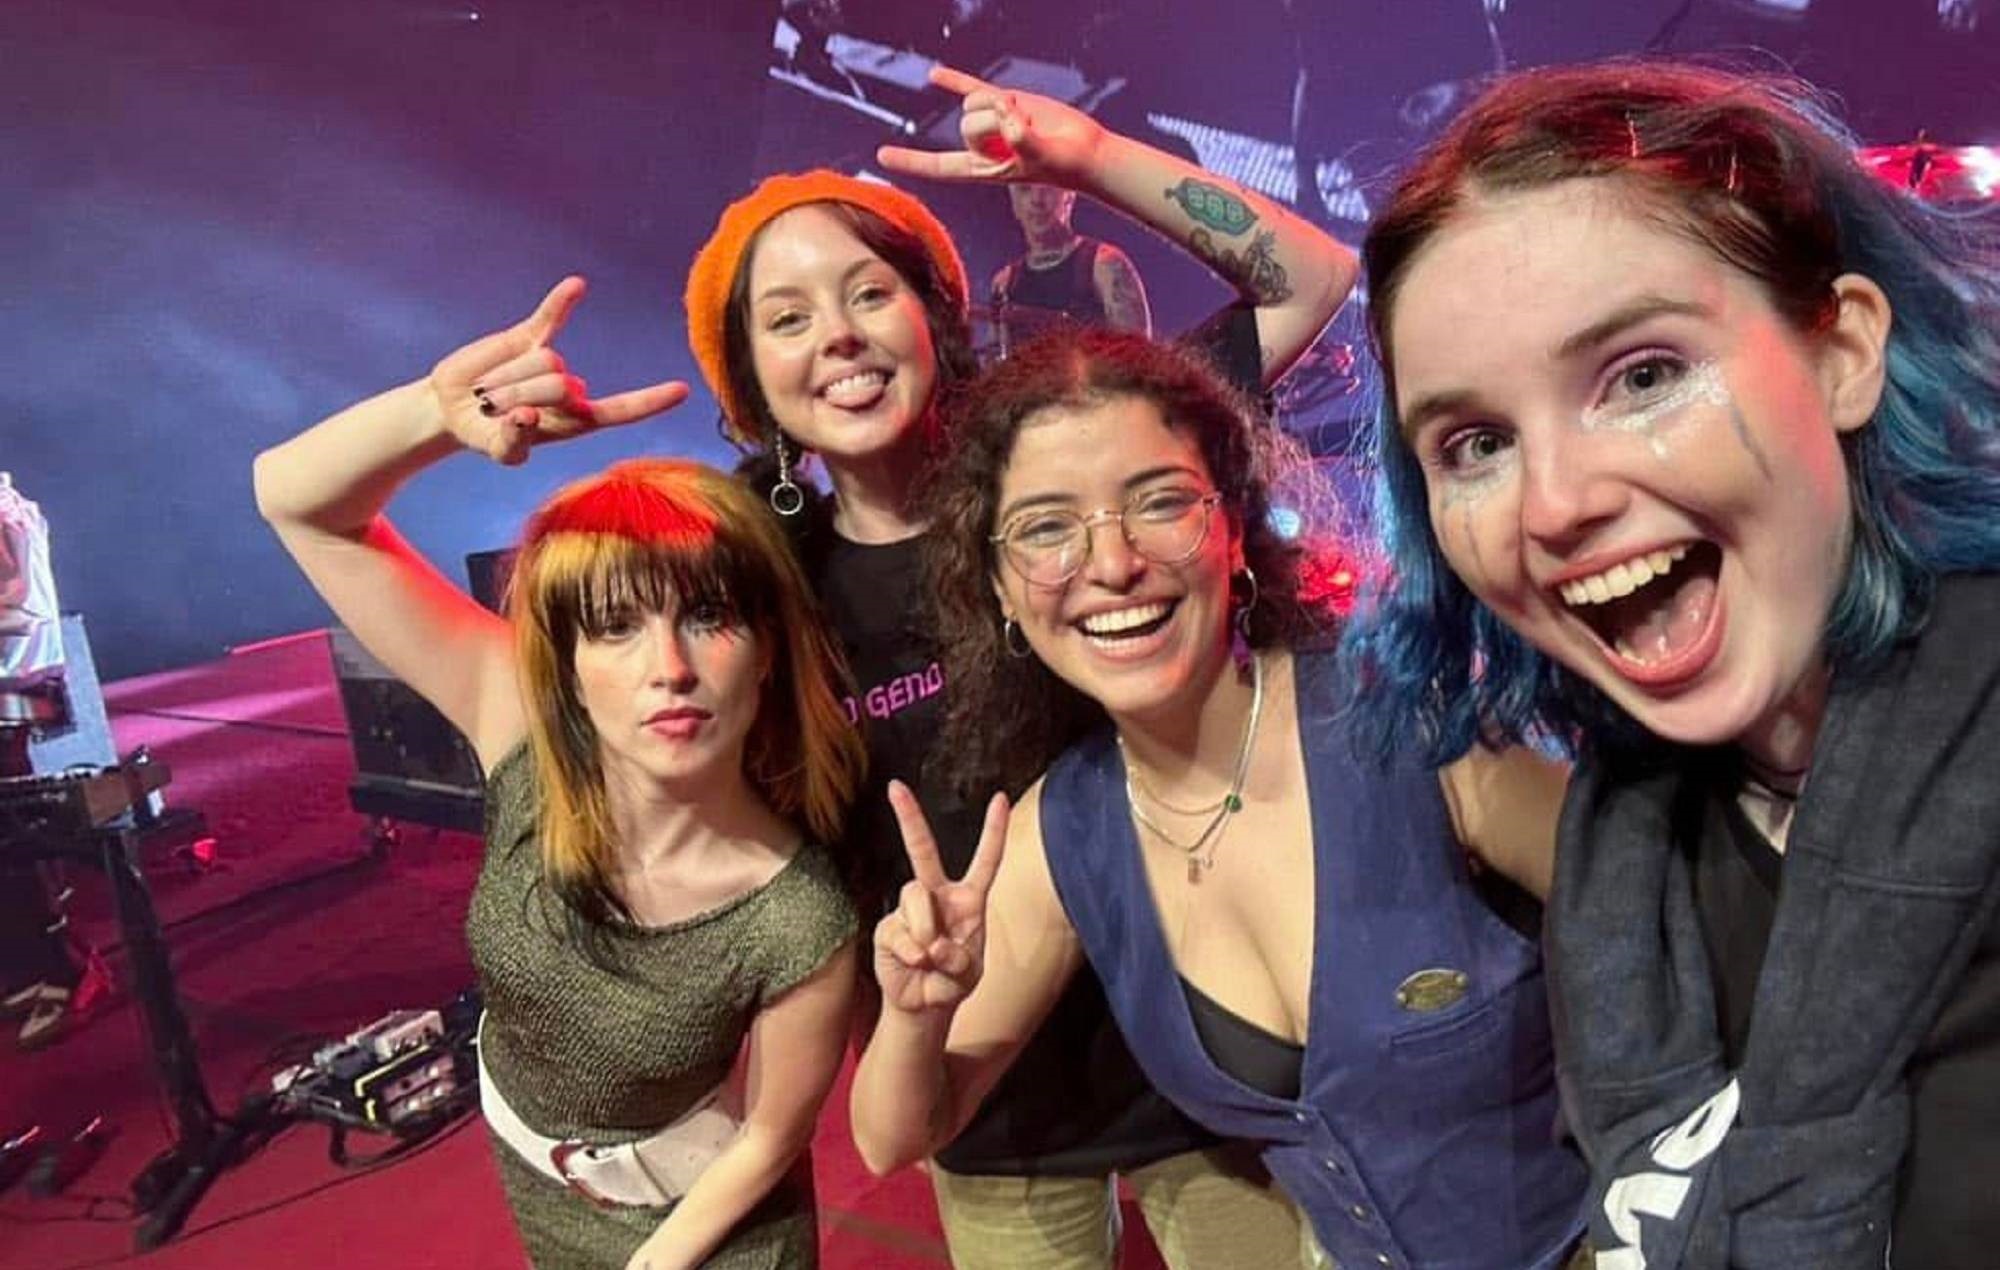 Paramore’s Hayley Williams invites singer from upcoming girl group Peaness on stage in Manchester